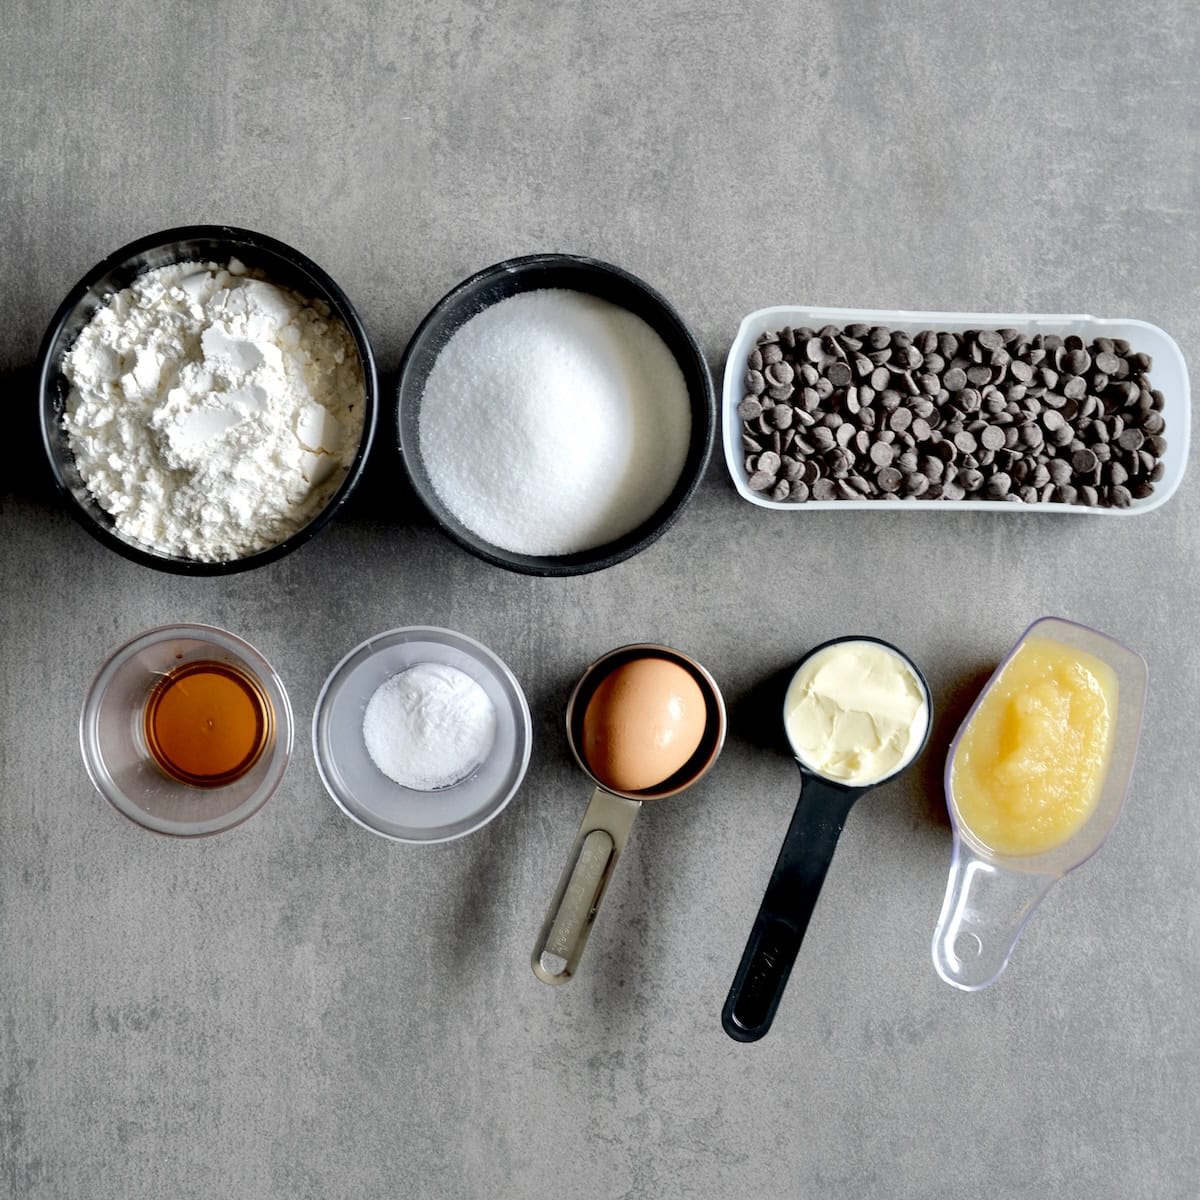 Ingredients needed for making healthy chocolate chip cookies